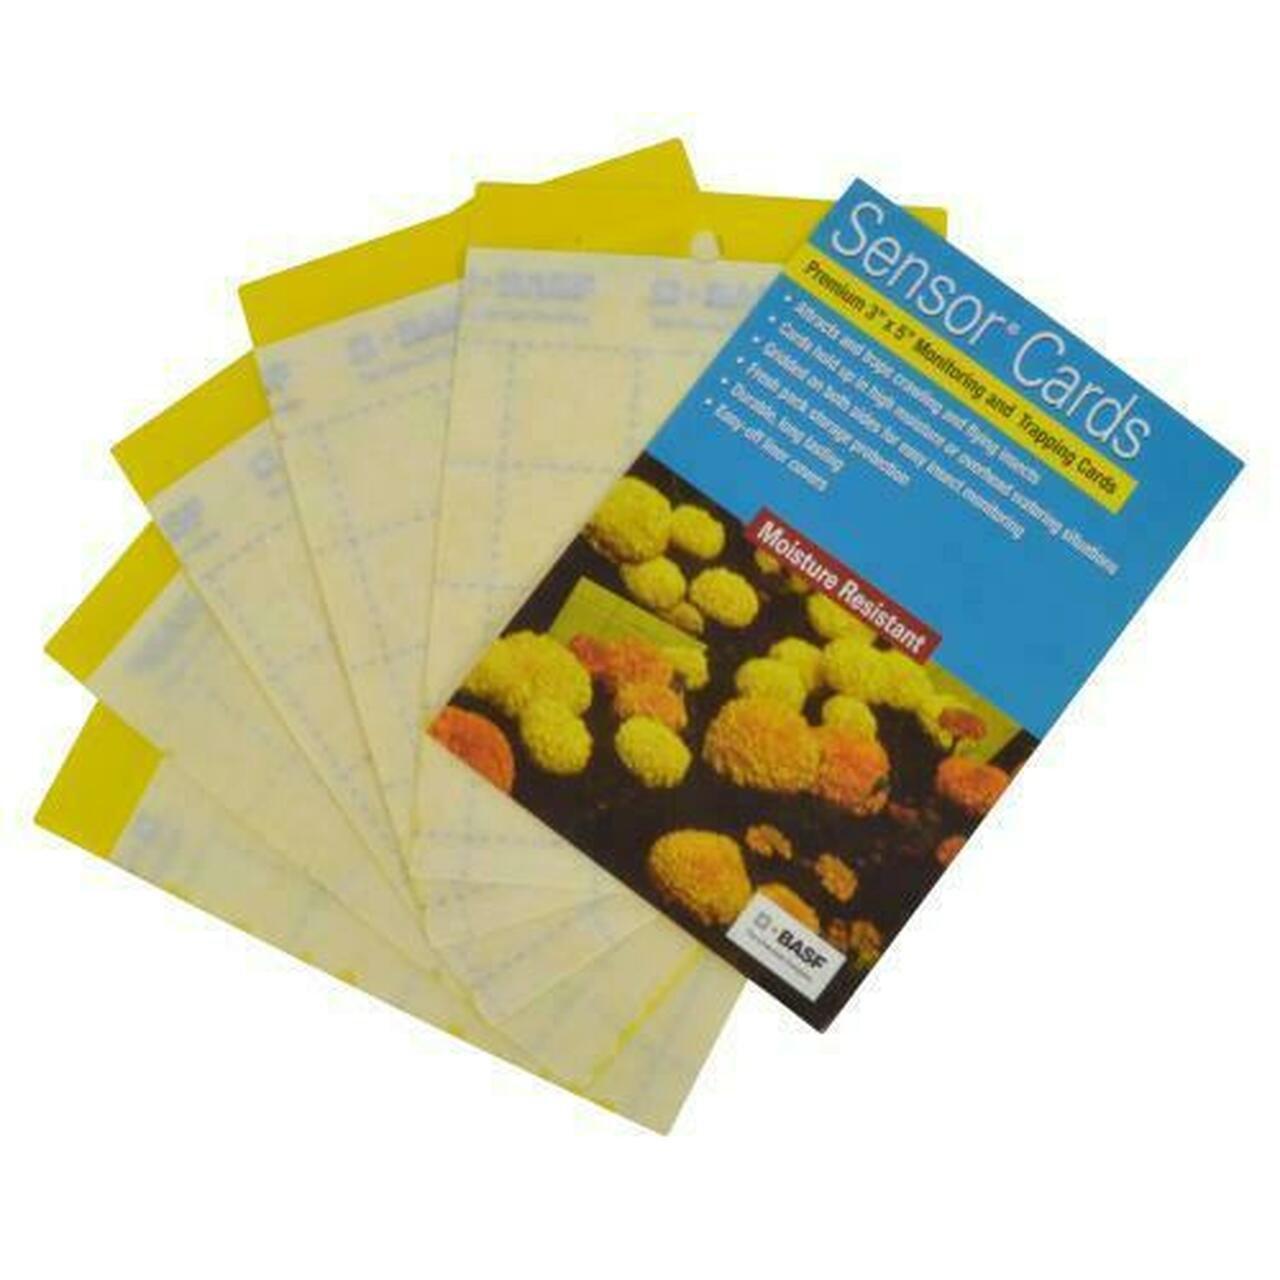 https://cdn.shopify.com/s/files/1/2485/1572/products/basf-sensor-yellow-monitoring-and-trapping-cards-50-cards-973400.jpg?v=1694540572&width=1280